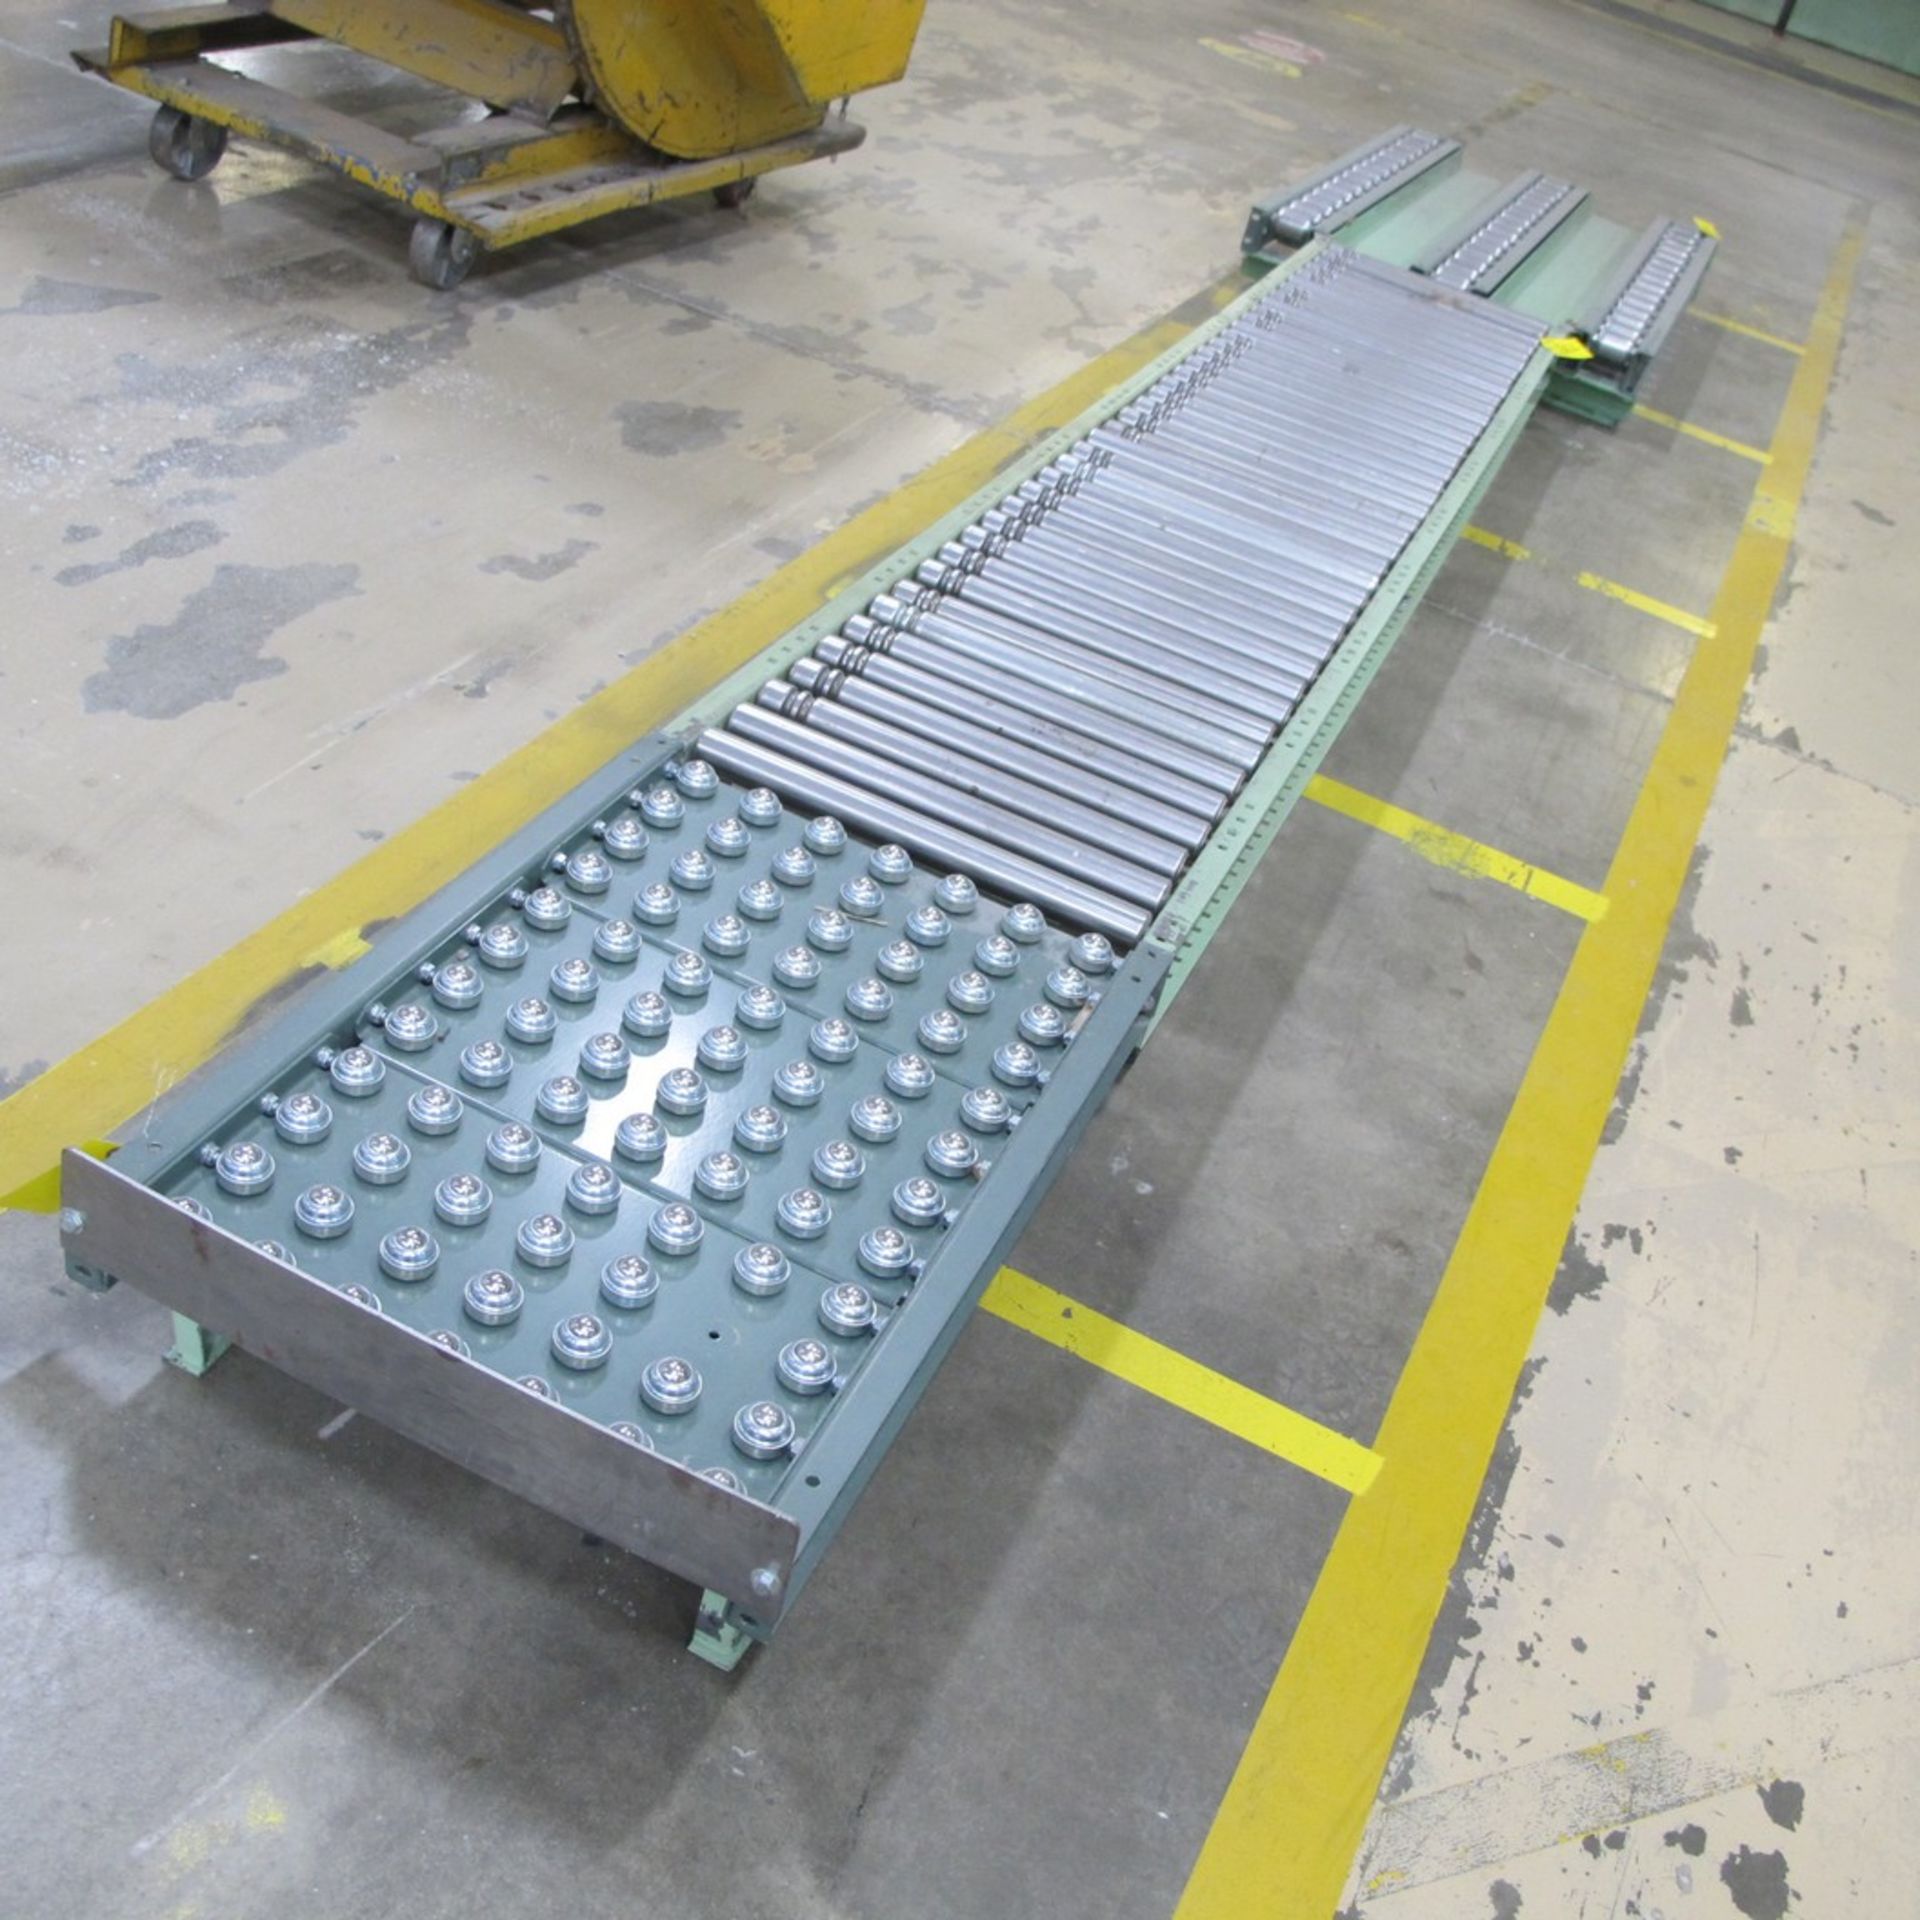 LOT OF (4) POWERED ROLLER/BALL CONVEYORS - APPROX. 10'L X 21"W W/ CONTROLS, HYTROL 5'L X 37"W, - Image 4 of 4